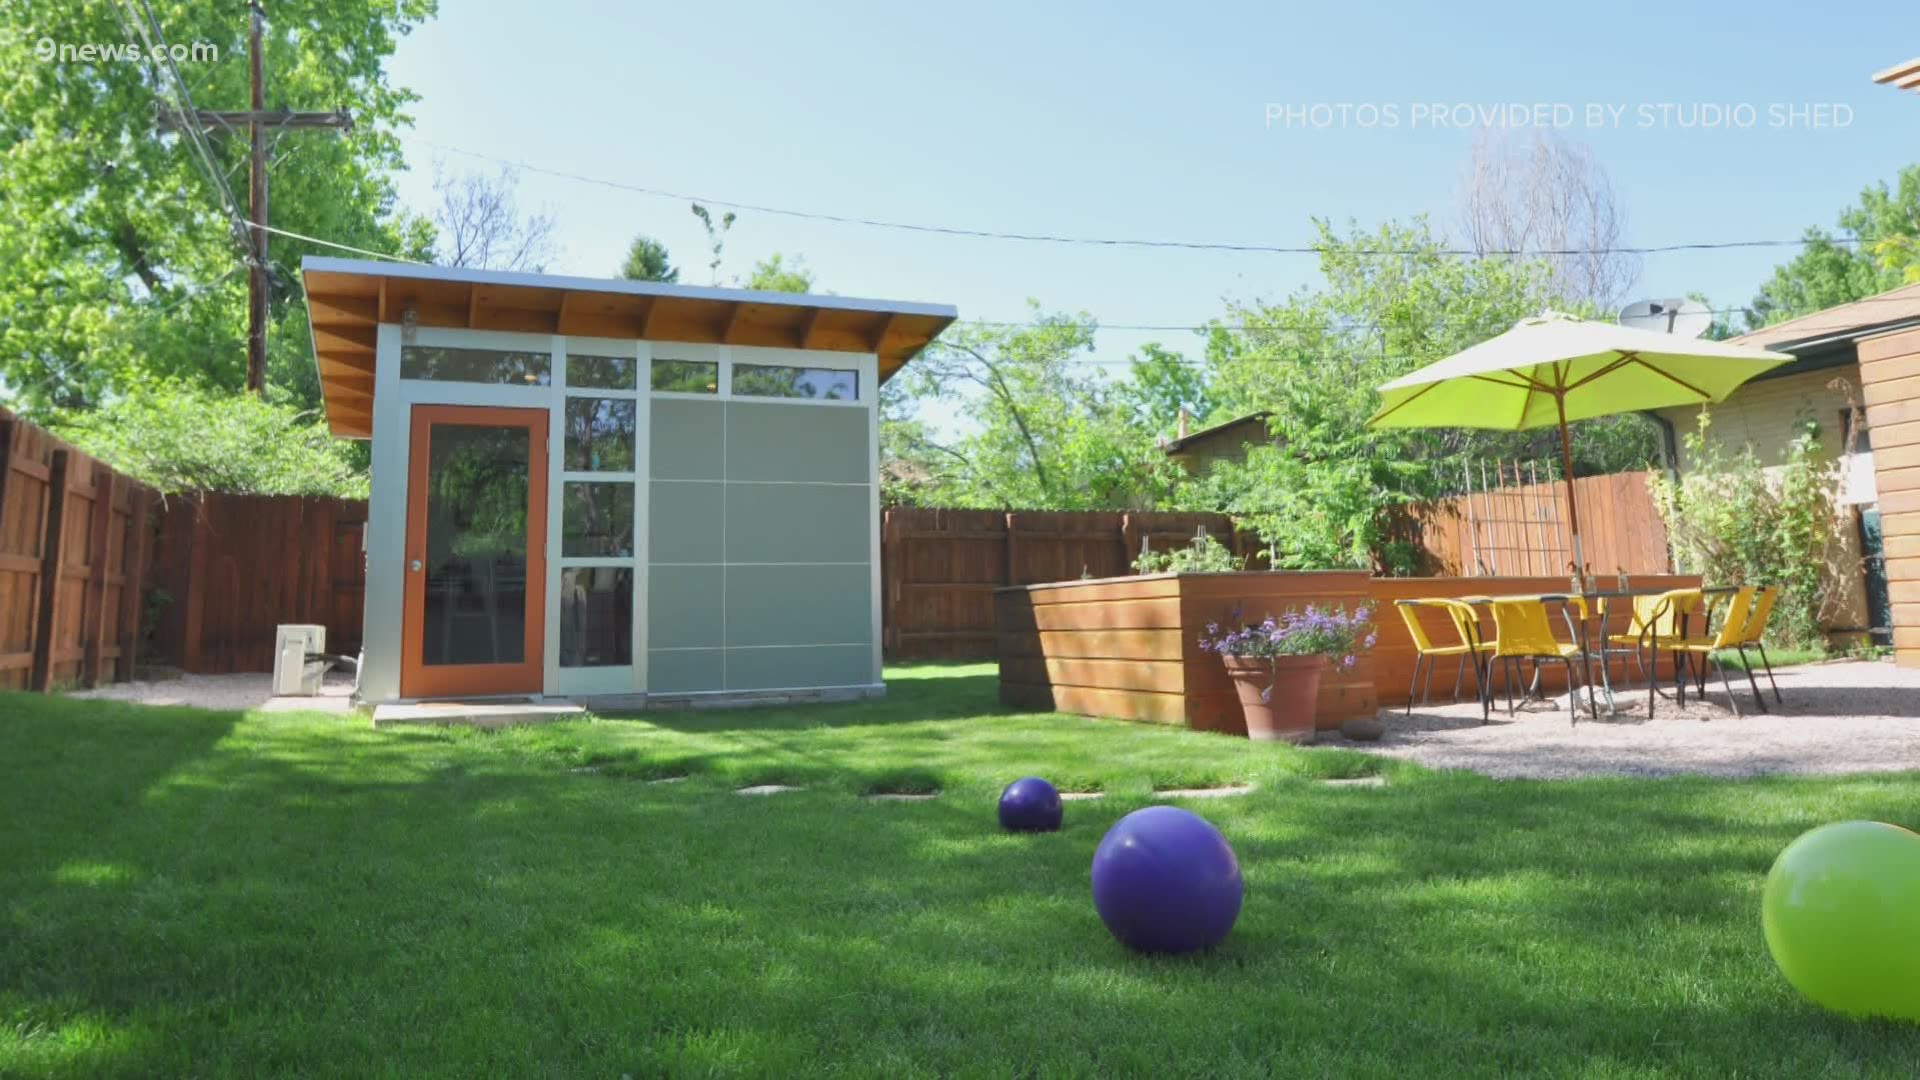 A Louisville company sells sheds for the backyard which are actually living spaces that can offer a provide a cheaper alternative to a new home.